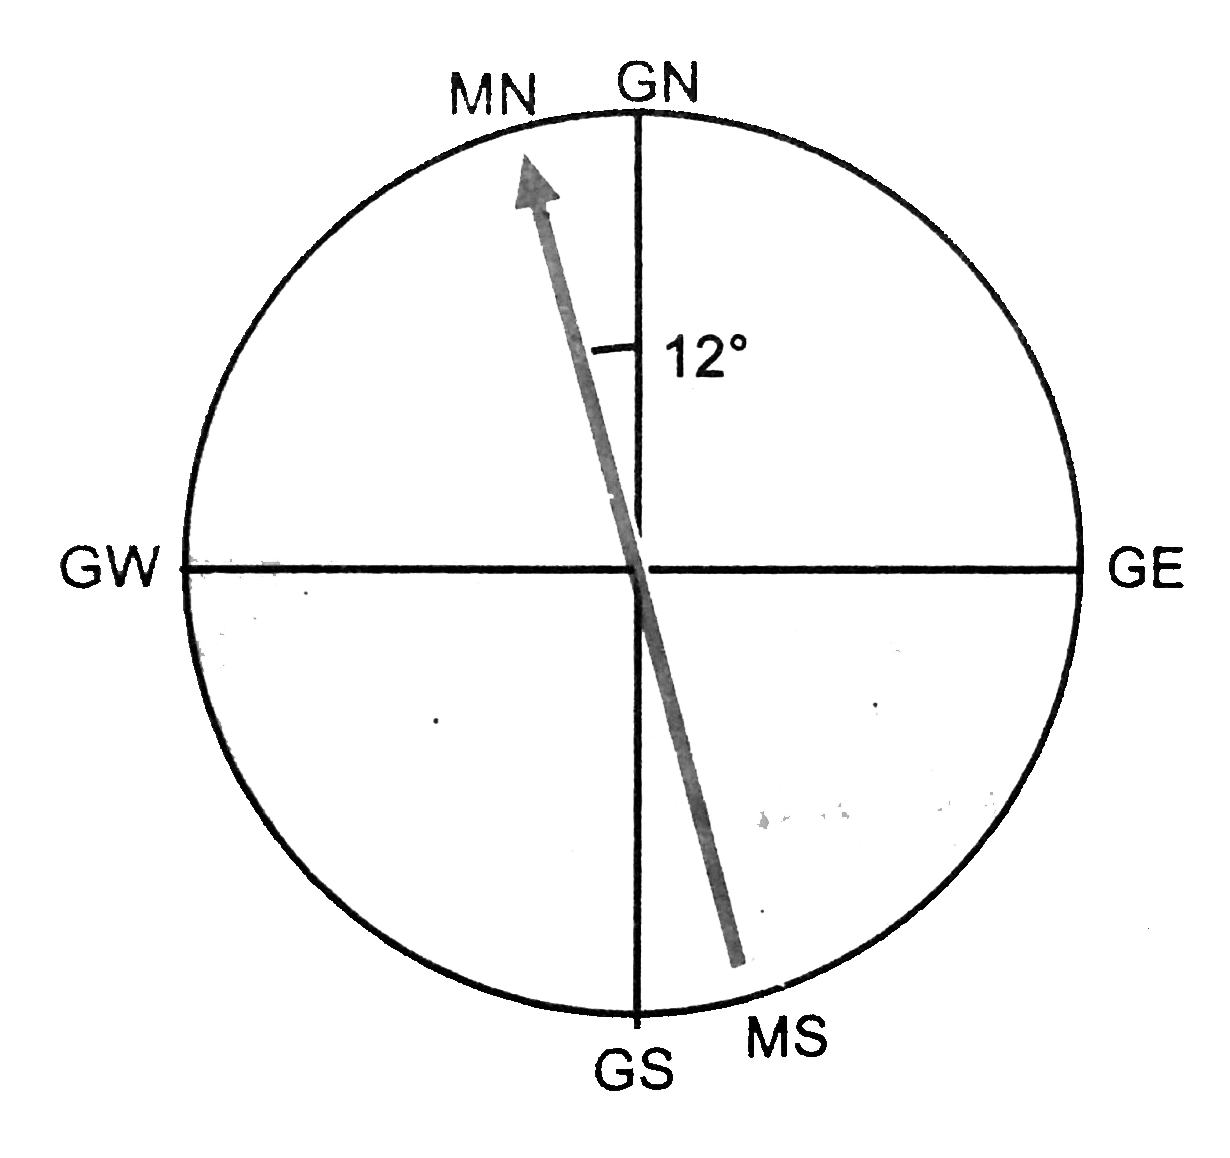 At a certain location in Africa, compass points 12^@ west of geographic north, figure. The north tip of magnetic needle of a dip circle placed in the plane of magnetic meridian points 60^@ above the horizontal. The horizontal component of earth's field is measured to be 0.16 gauss. Specify the direction and magnitude of the earth's field at the location.